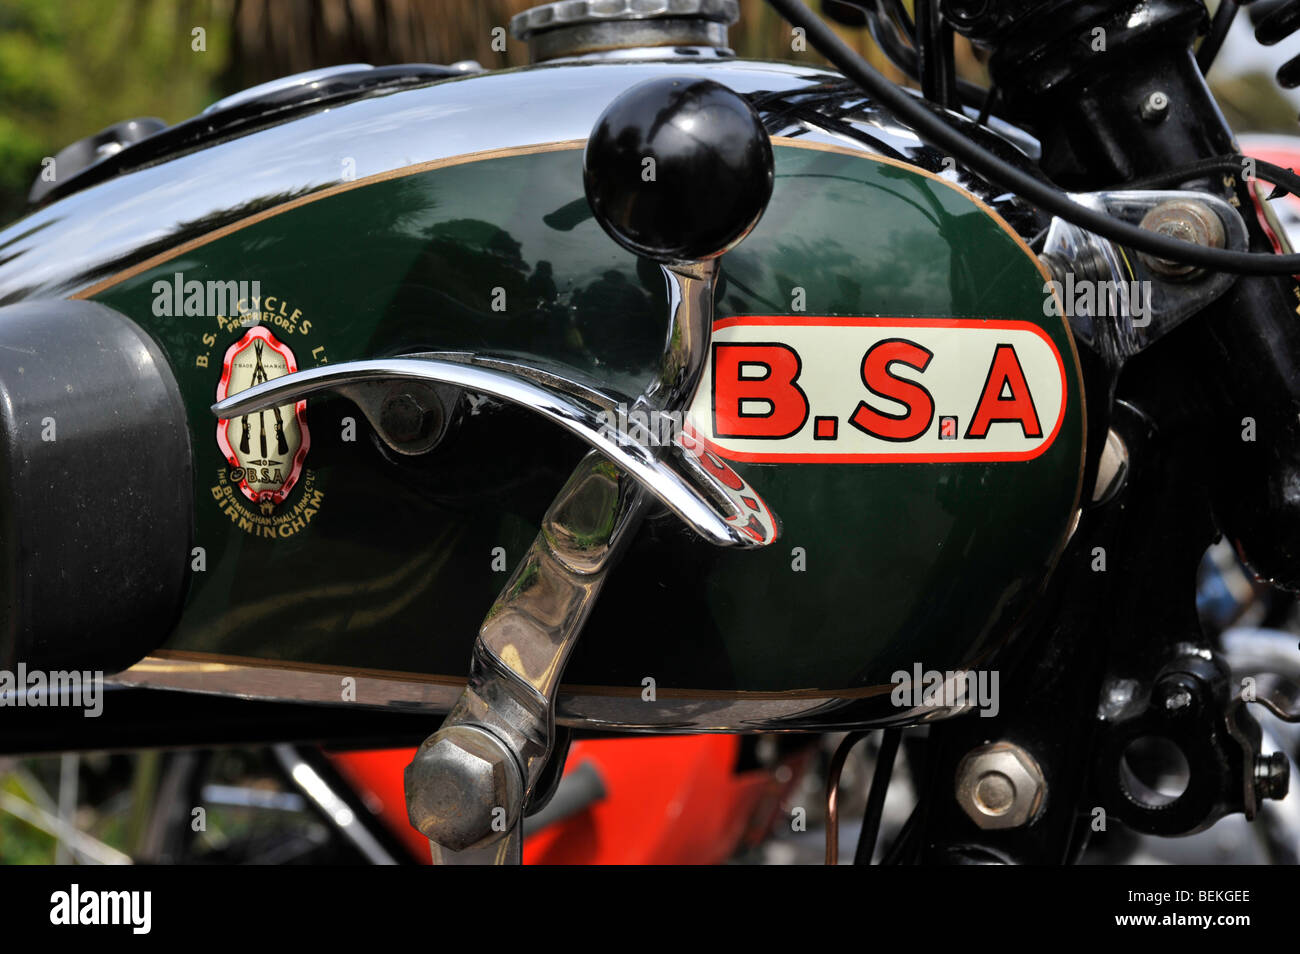 fuel tank and hand gear change on bsa 